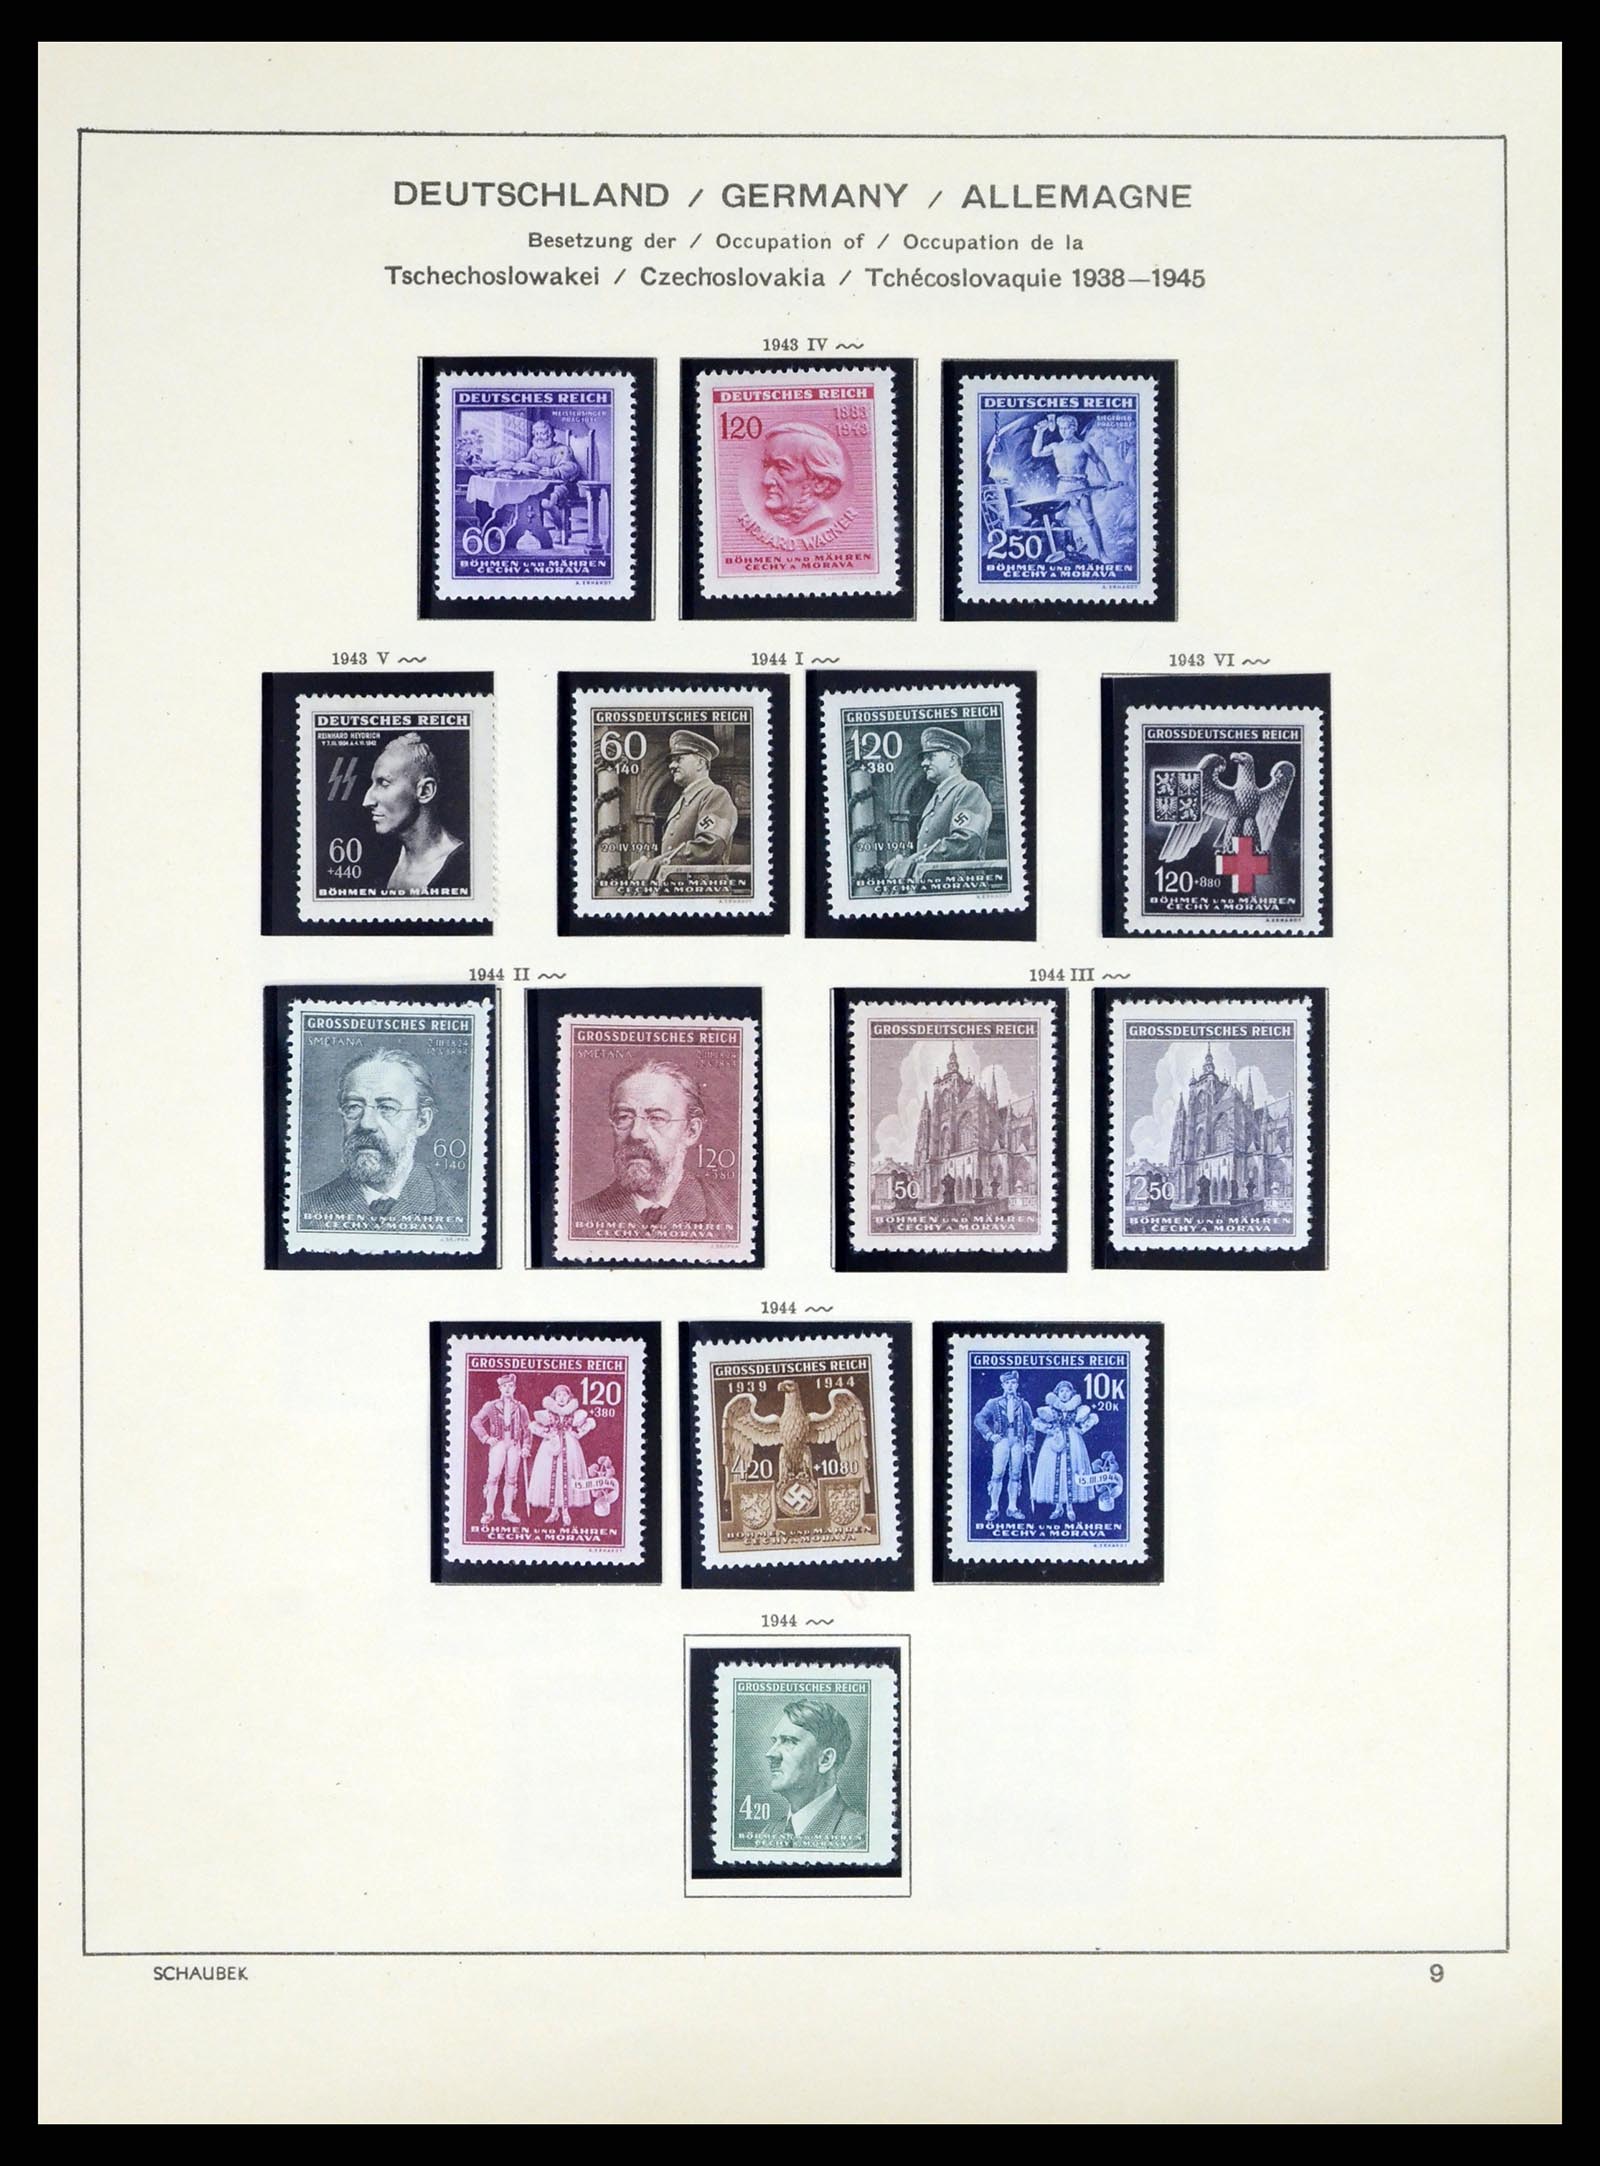 38025 0084 - Stamp collection 38025 German territories 1920-1959.